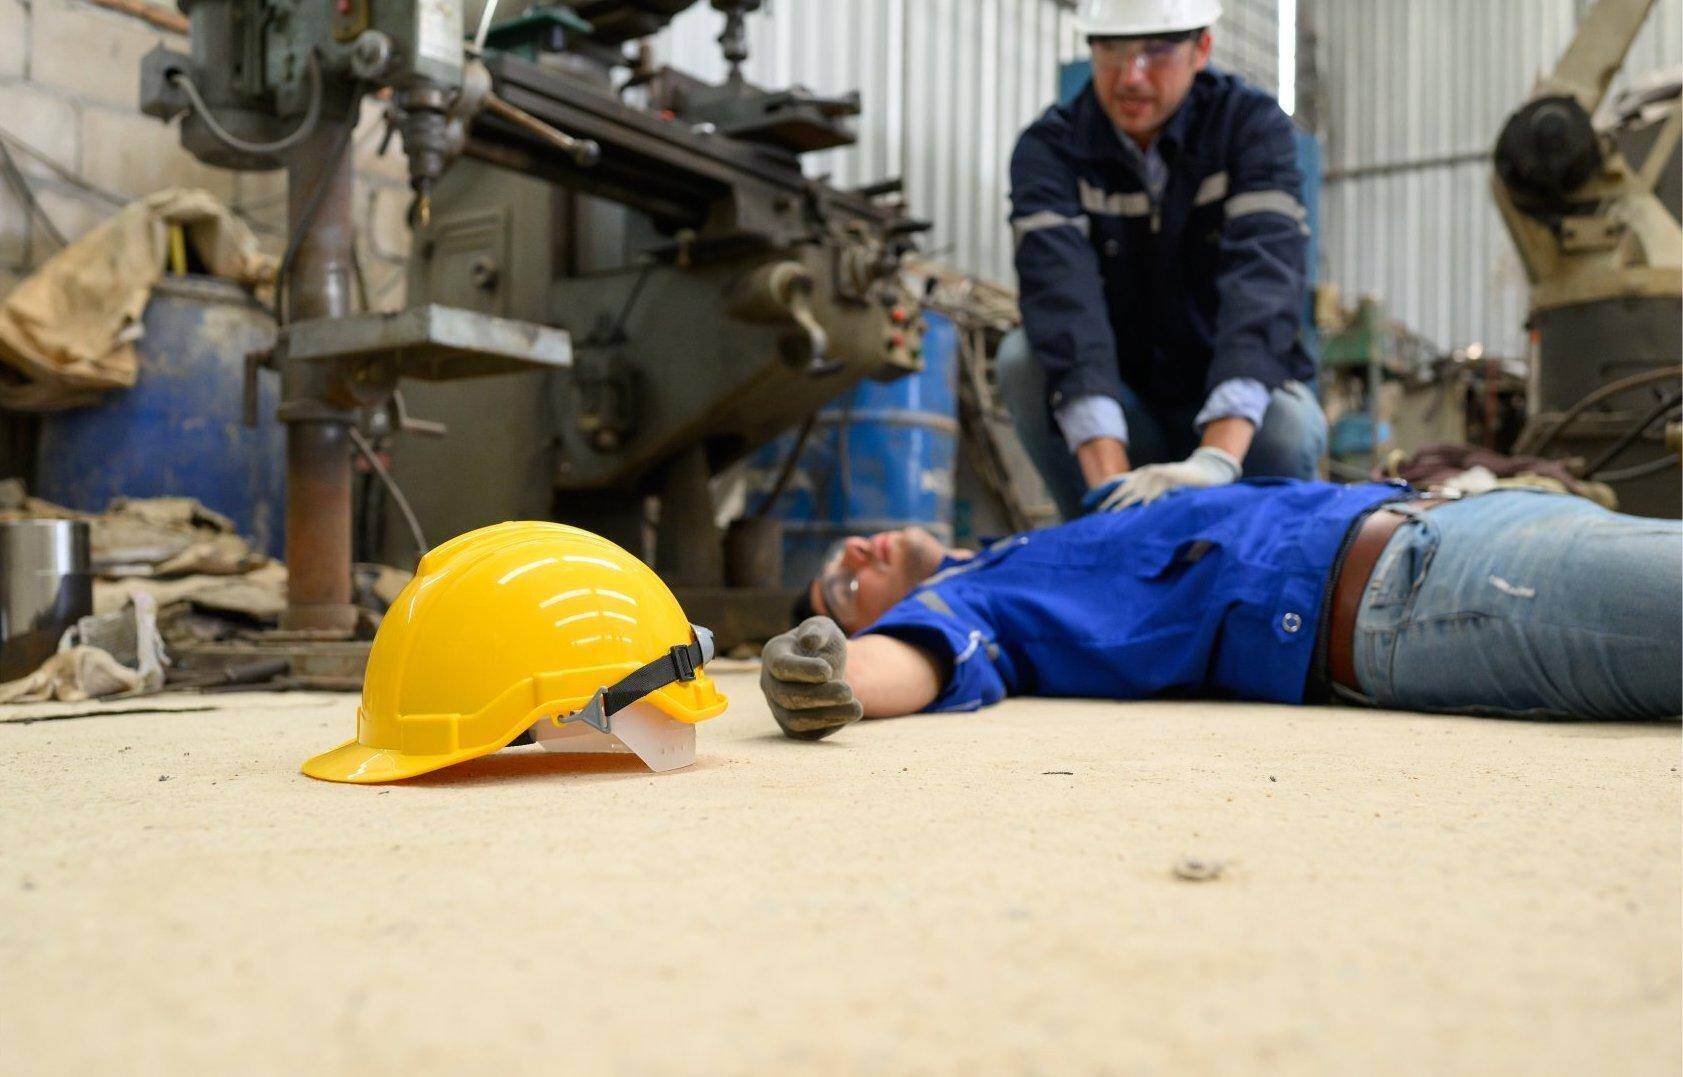 An unconscious man who has been injured on the job who will file for workers compensation in Macon, Georgia